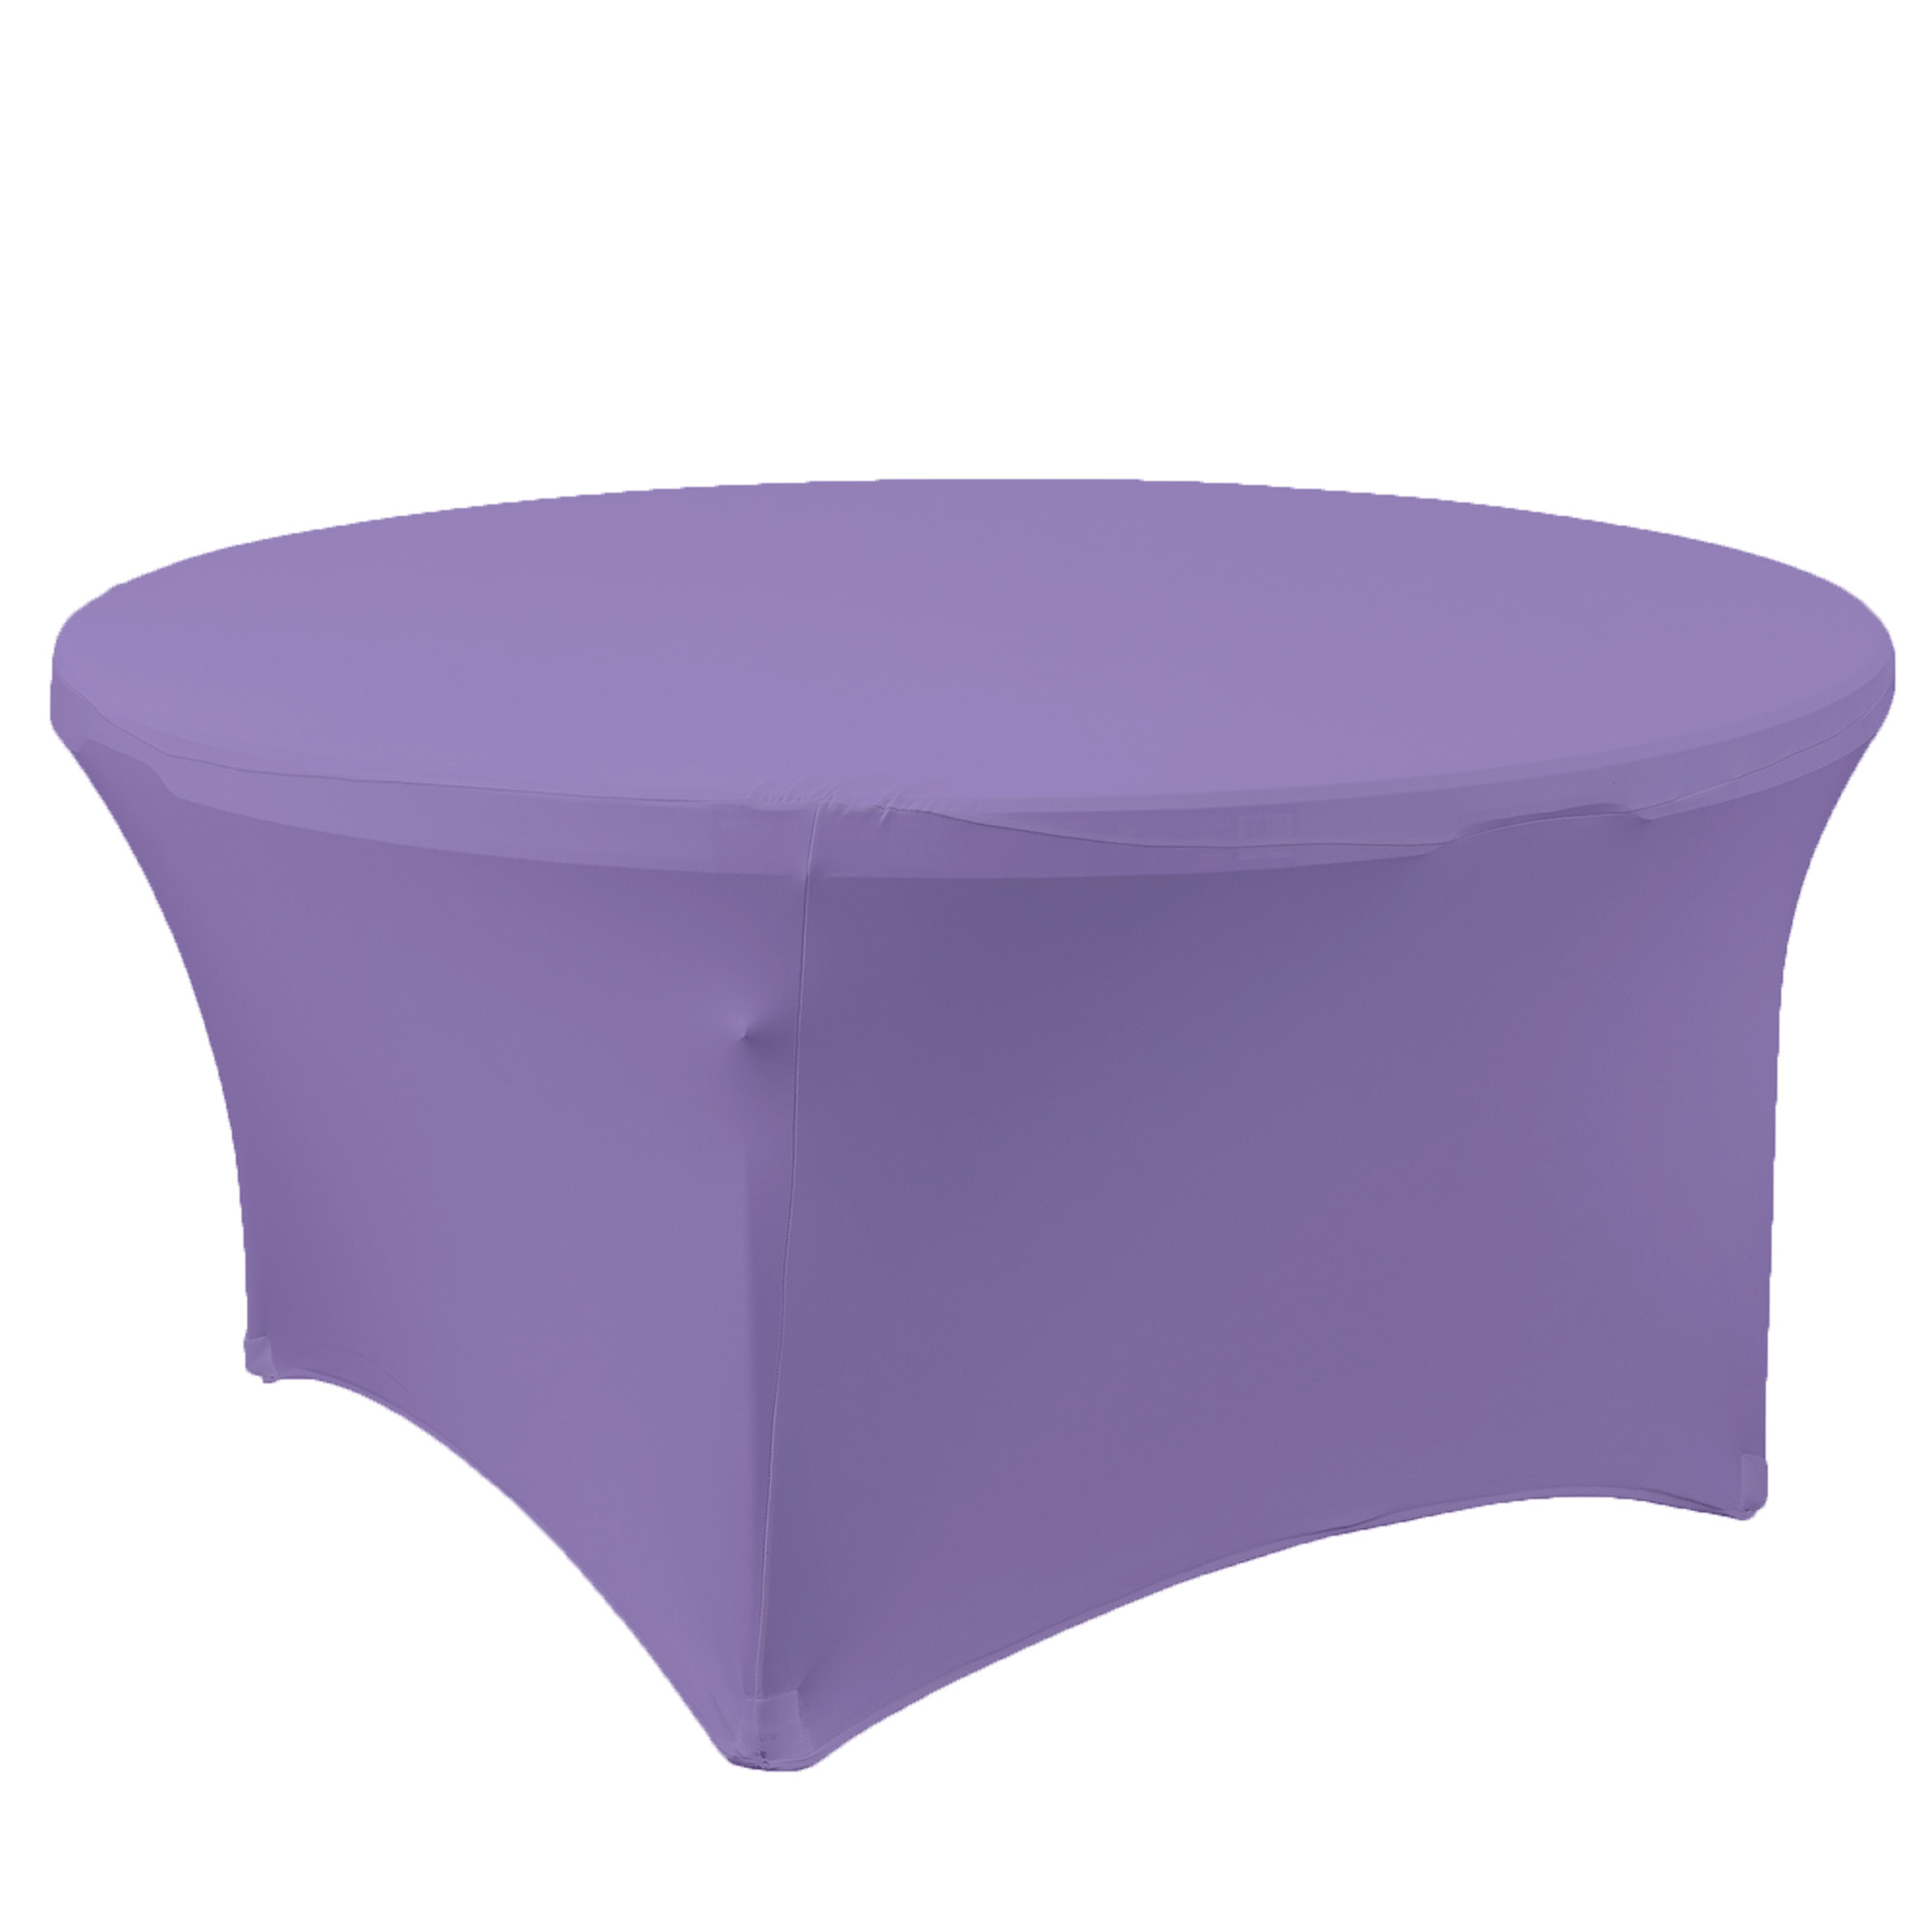 Spandex Round Table Cover 60" - Lavender